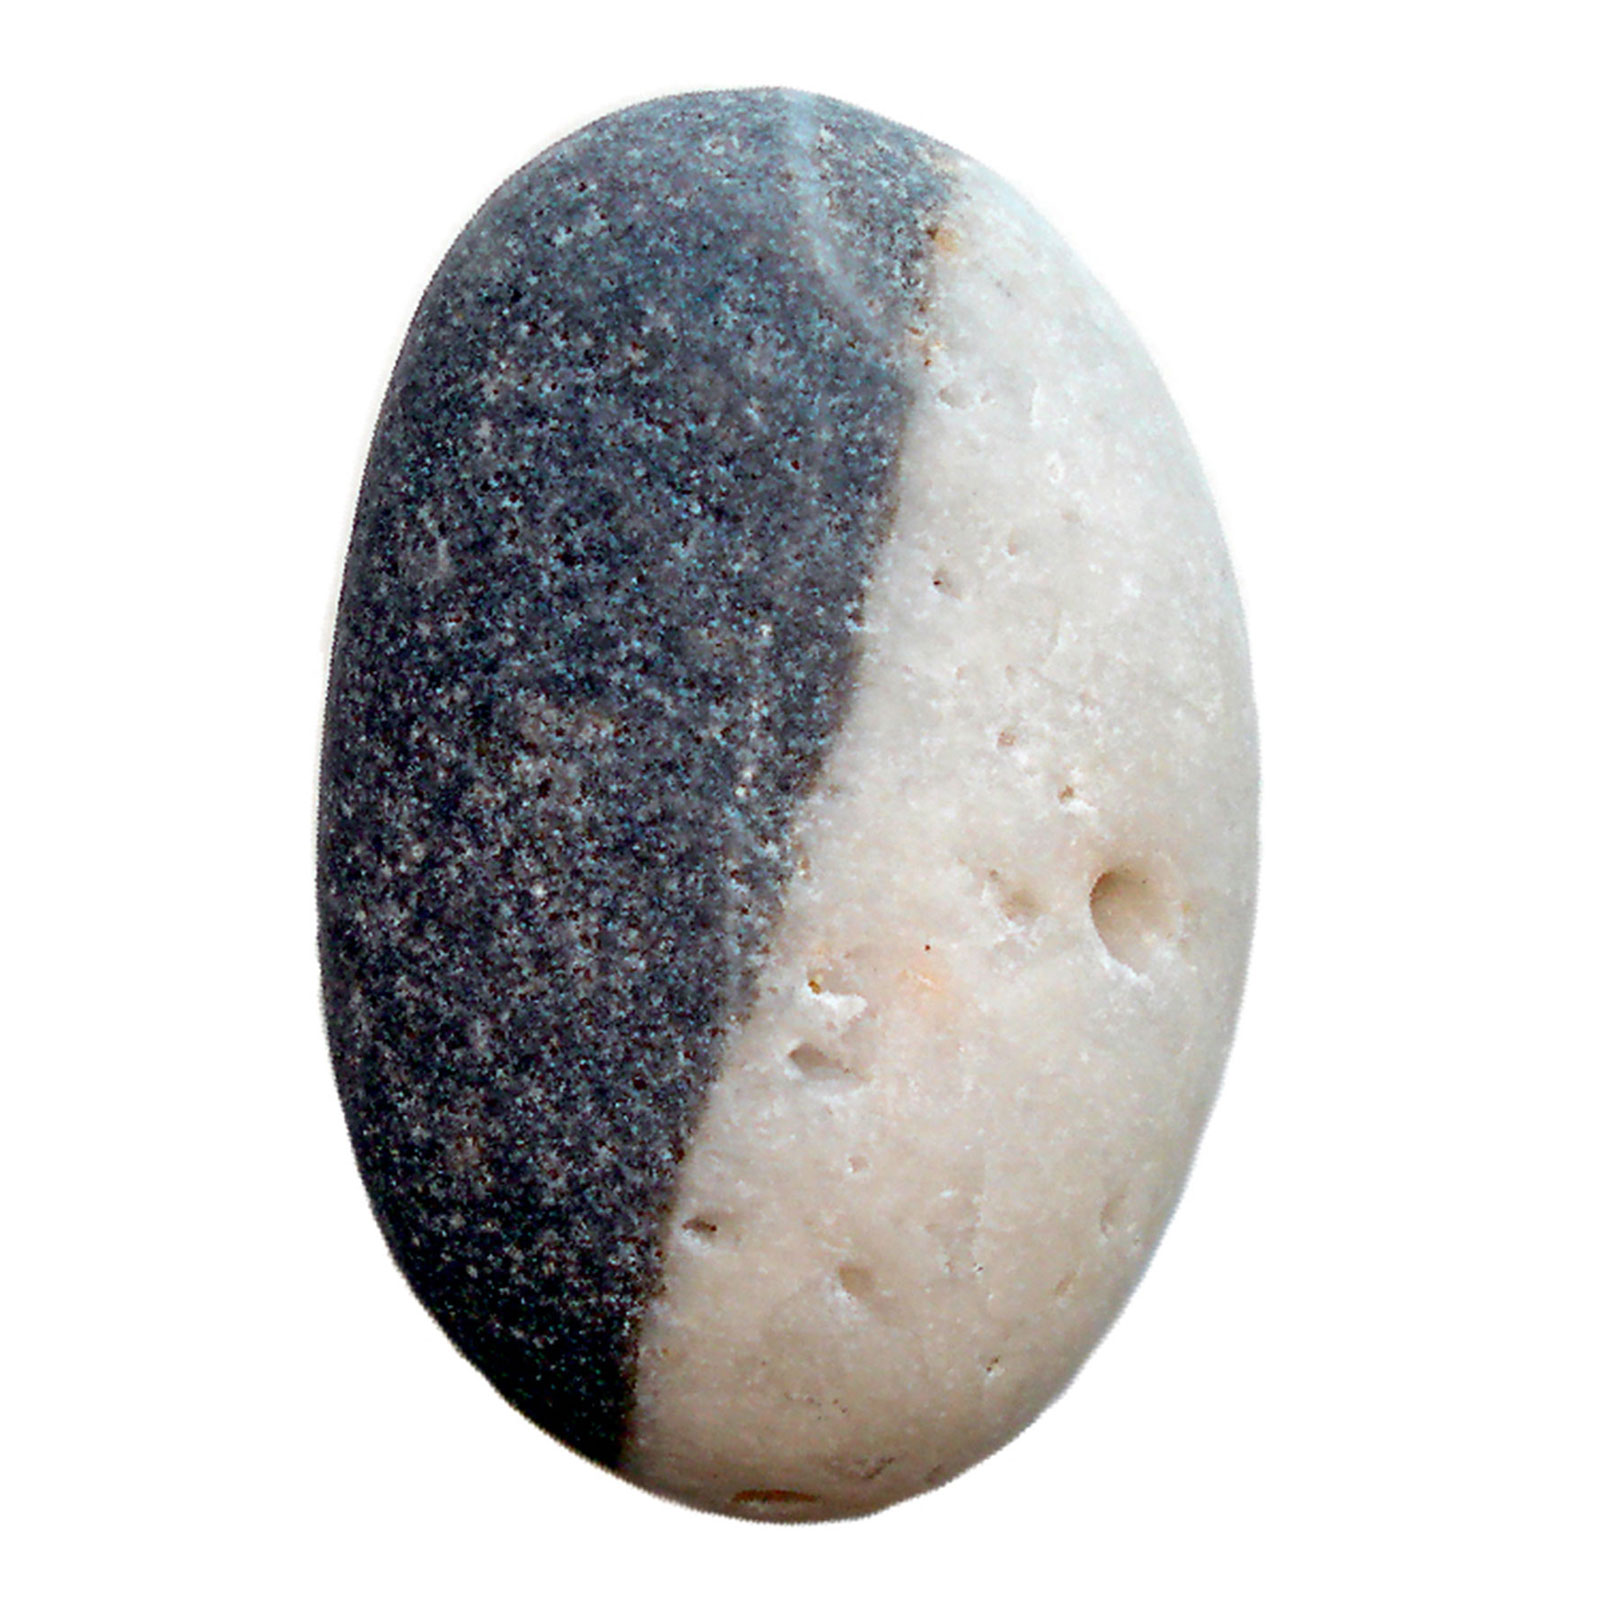 A photograph of a rock which resembles a black-and-white cookie.